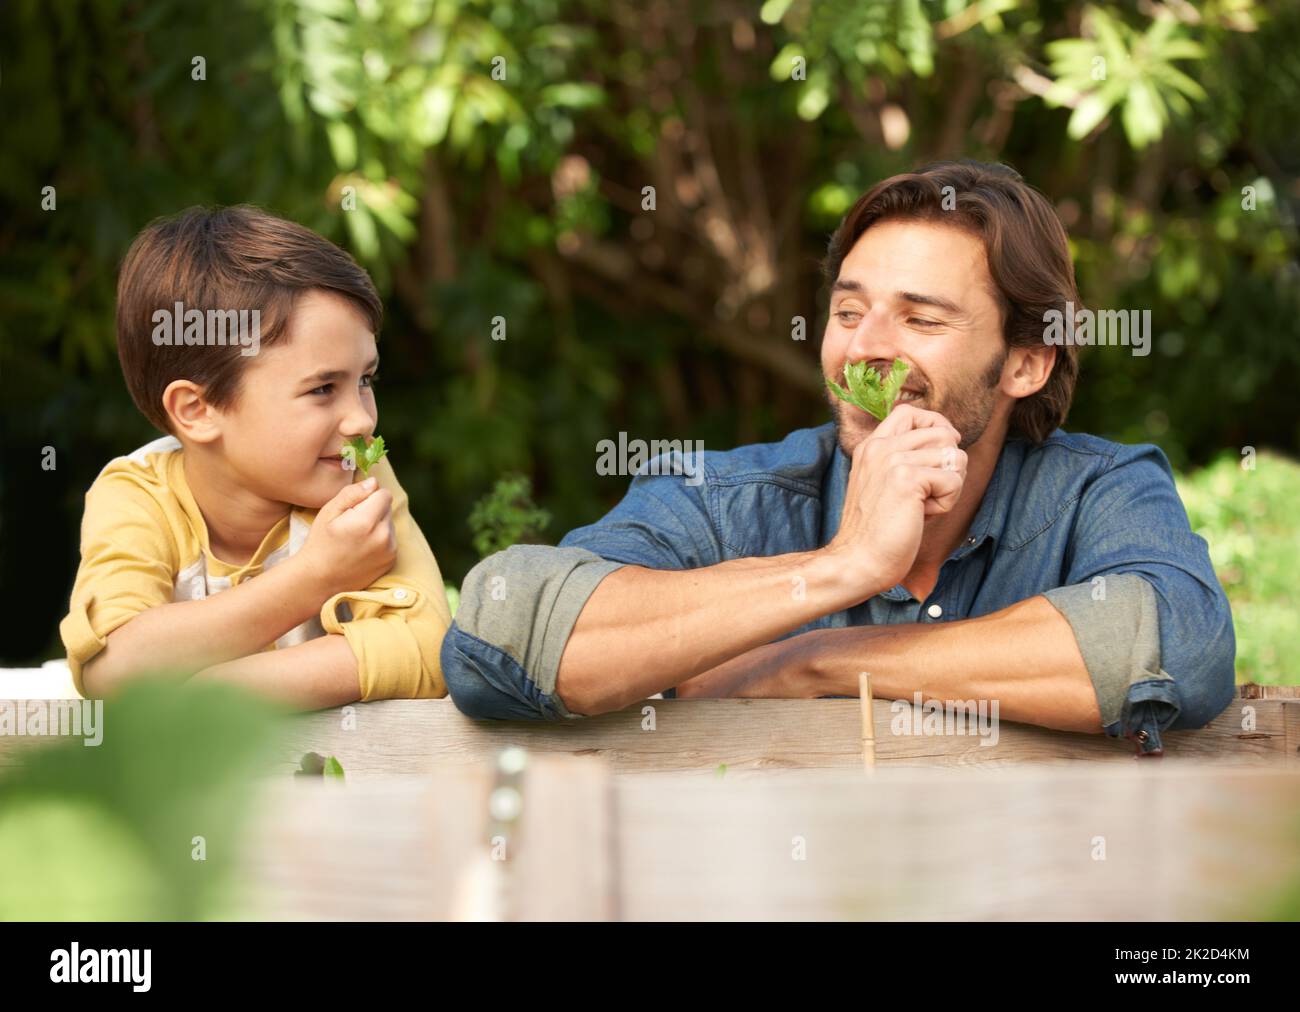 Mmm... smell that. Shot of a father and his son spending time together in the garden. Stock Photo